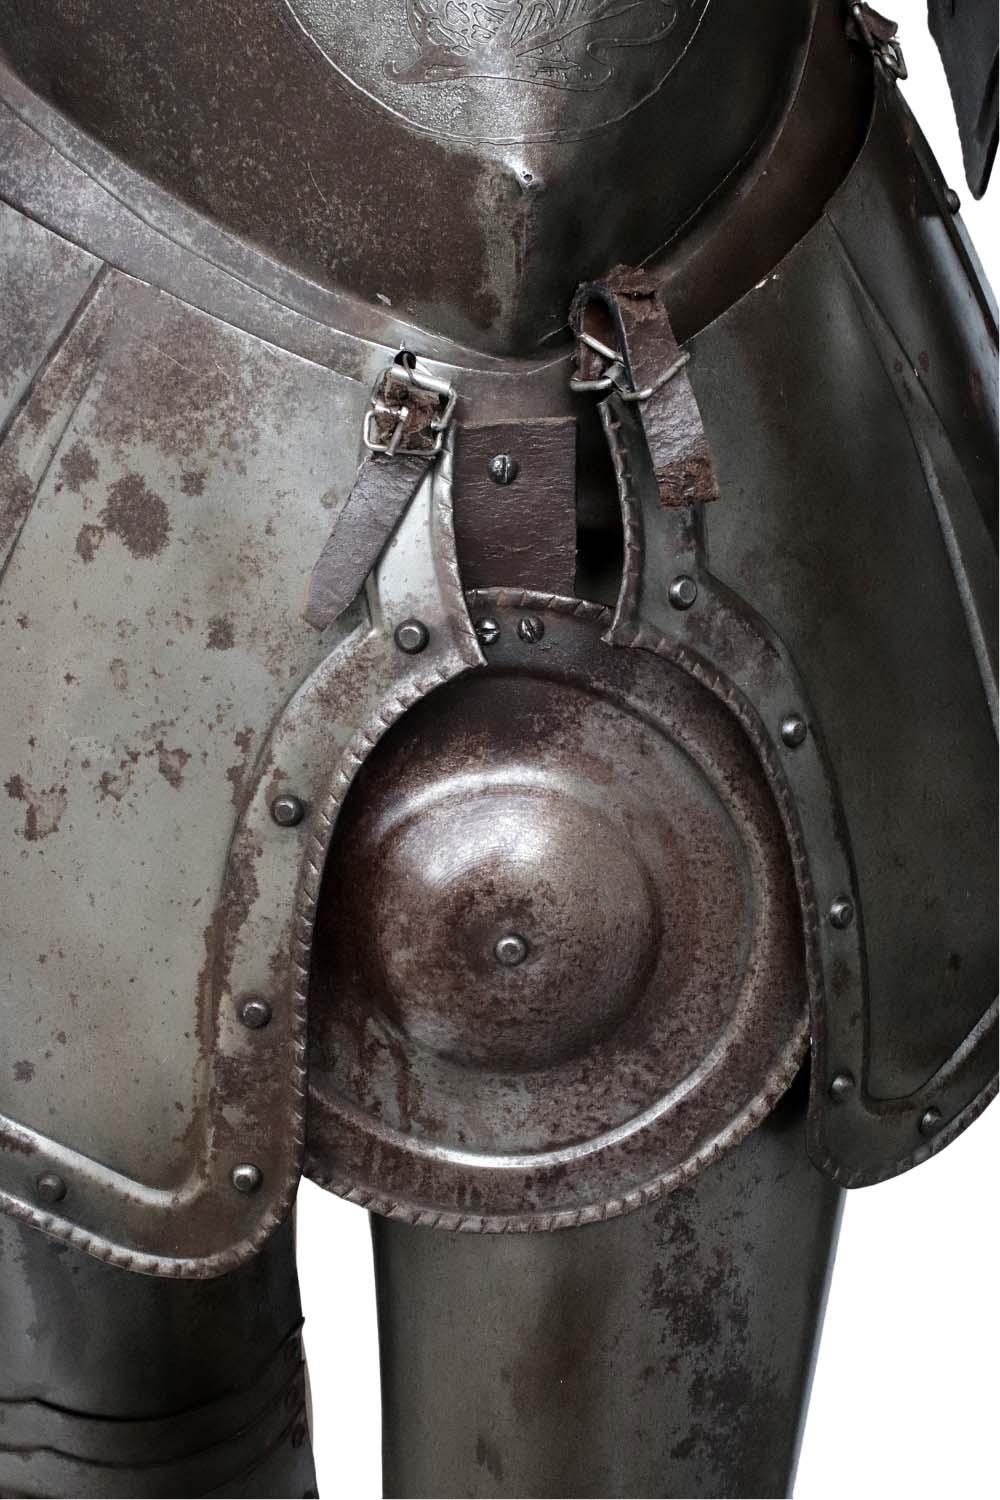 Attractive Victorian Era Suit of Armor in the style of 16-17th Century Italian or French Knight with Beautiful Large Etched Crowned Crest to Cuirass